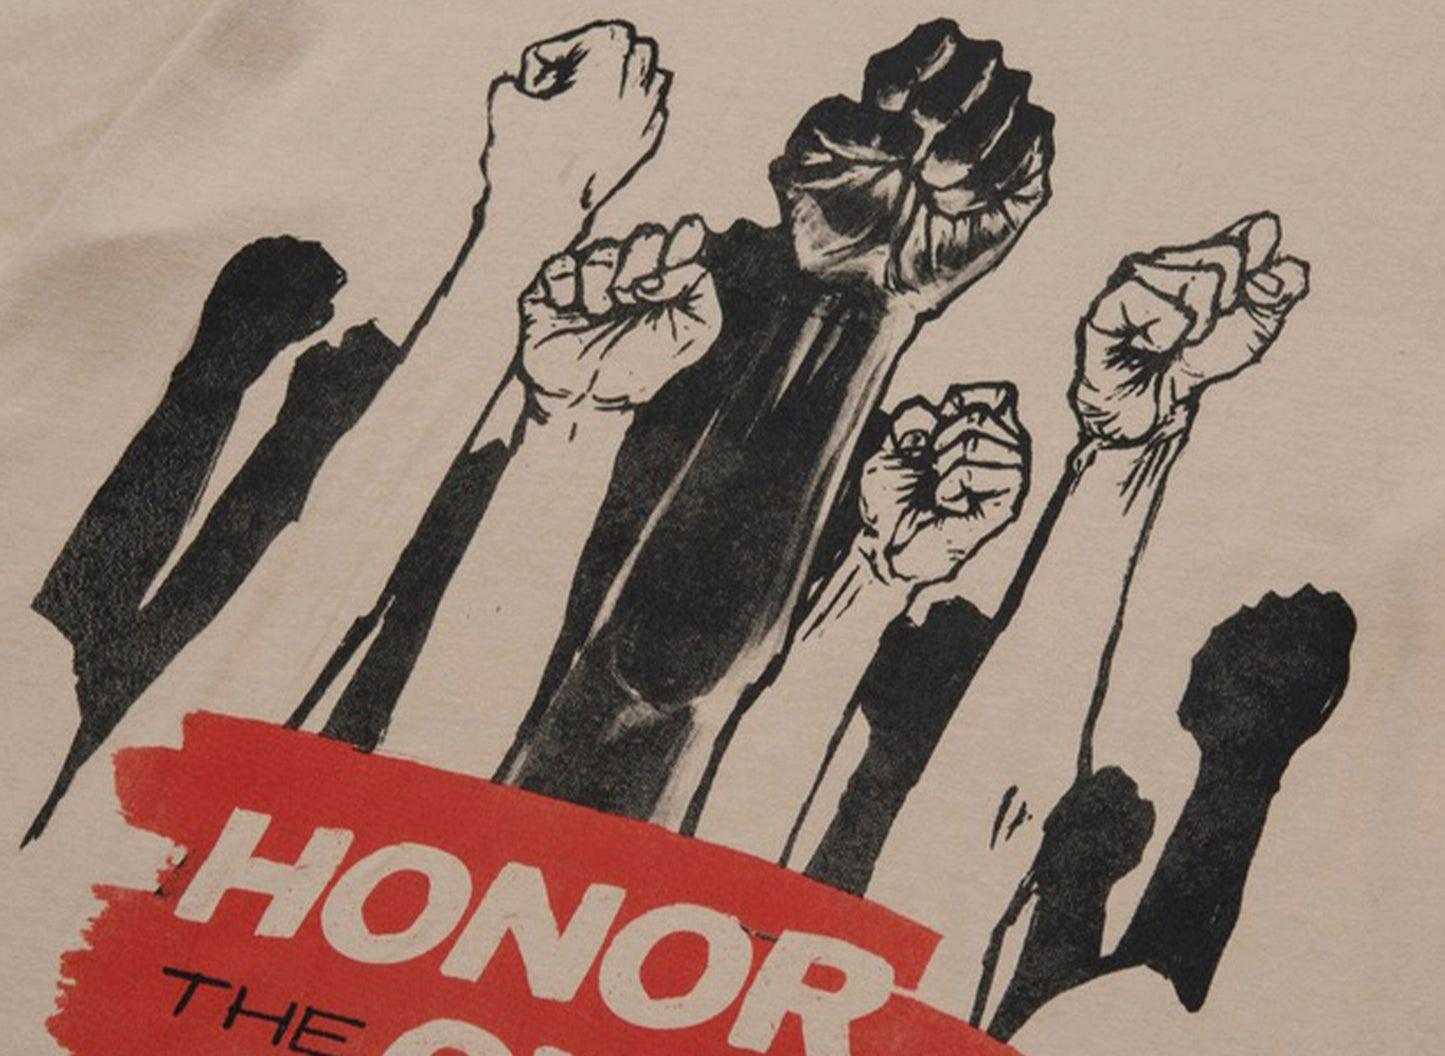 Honor the Gift Dignity S/S Tee xld